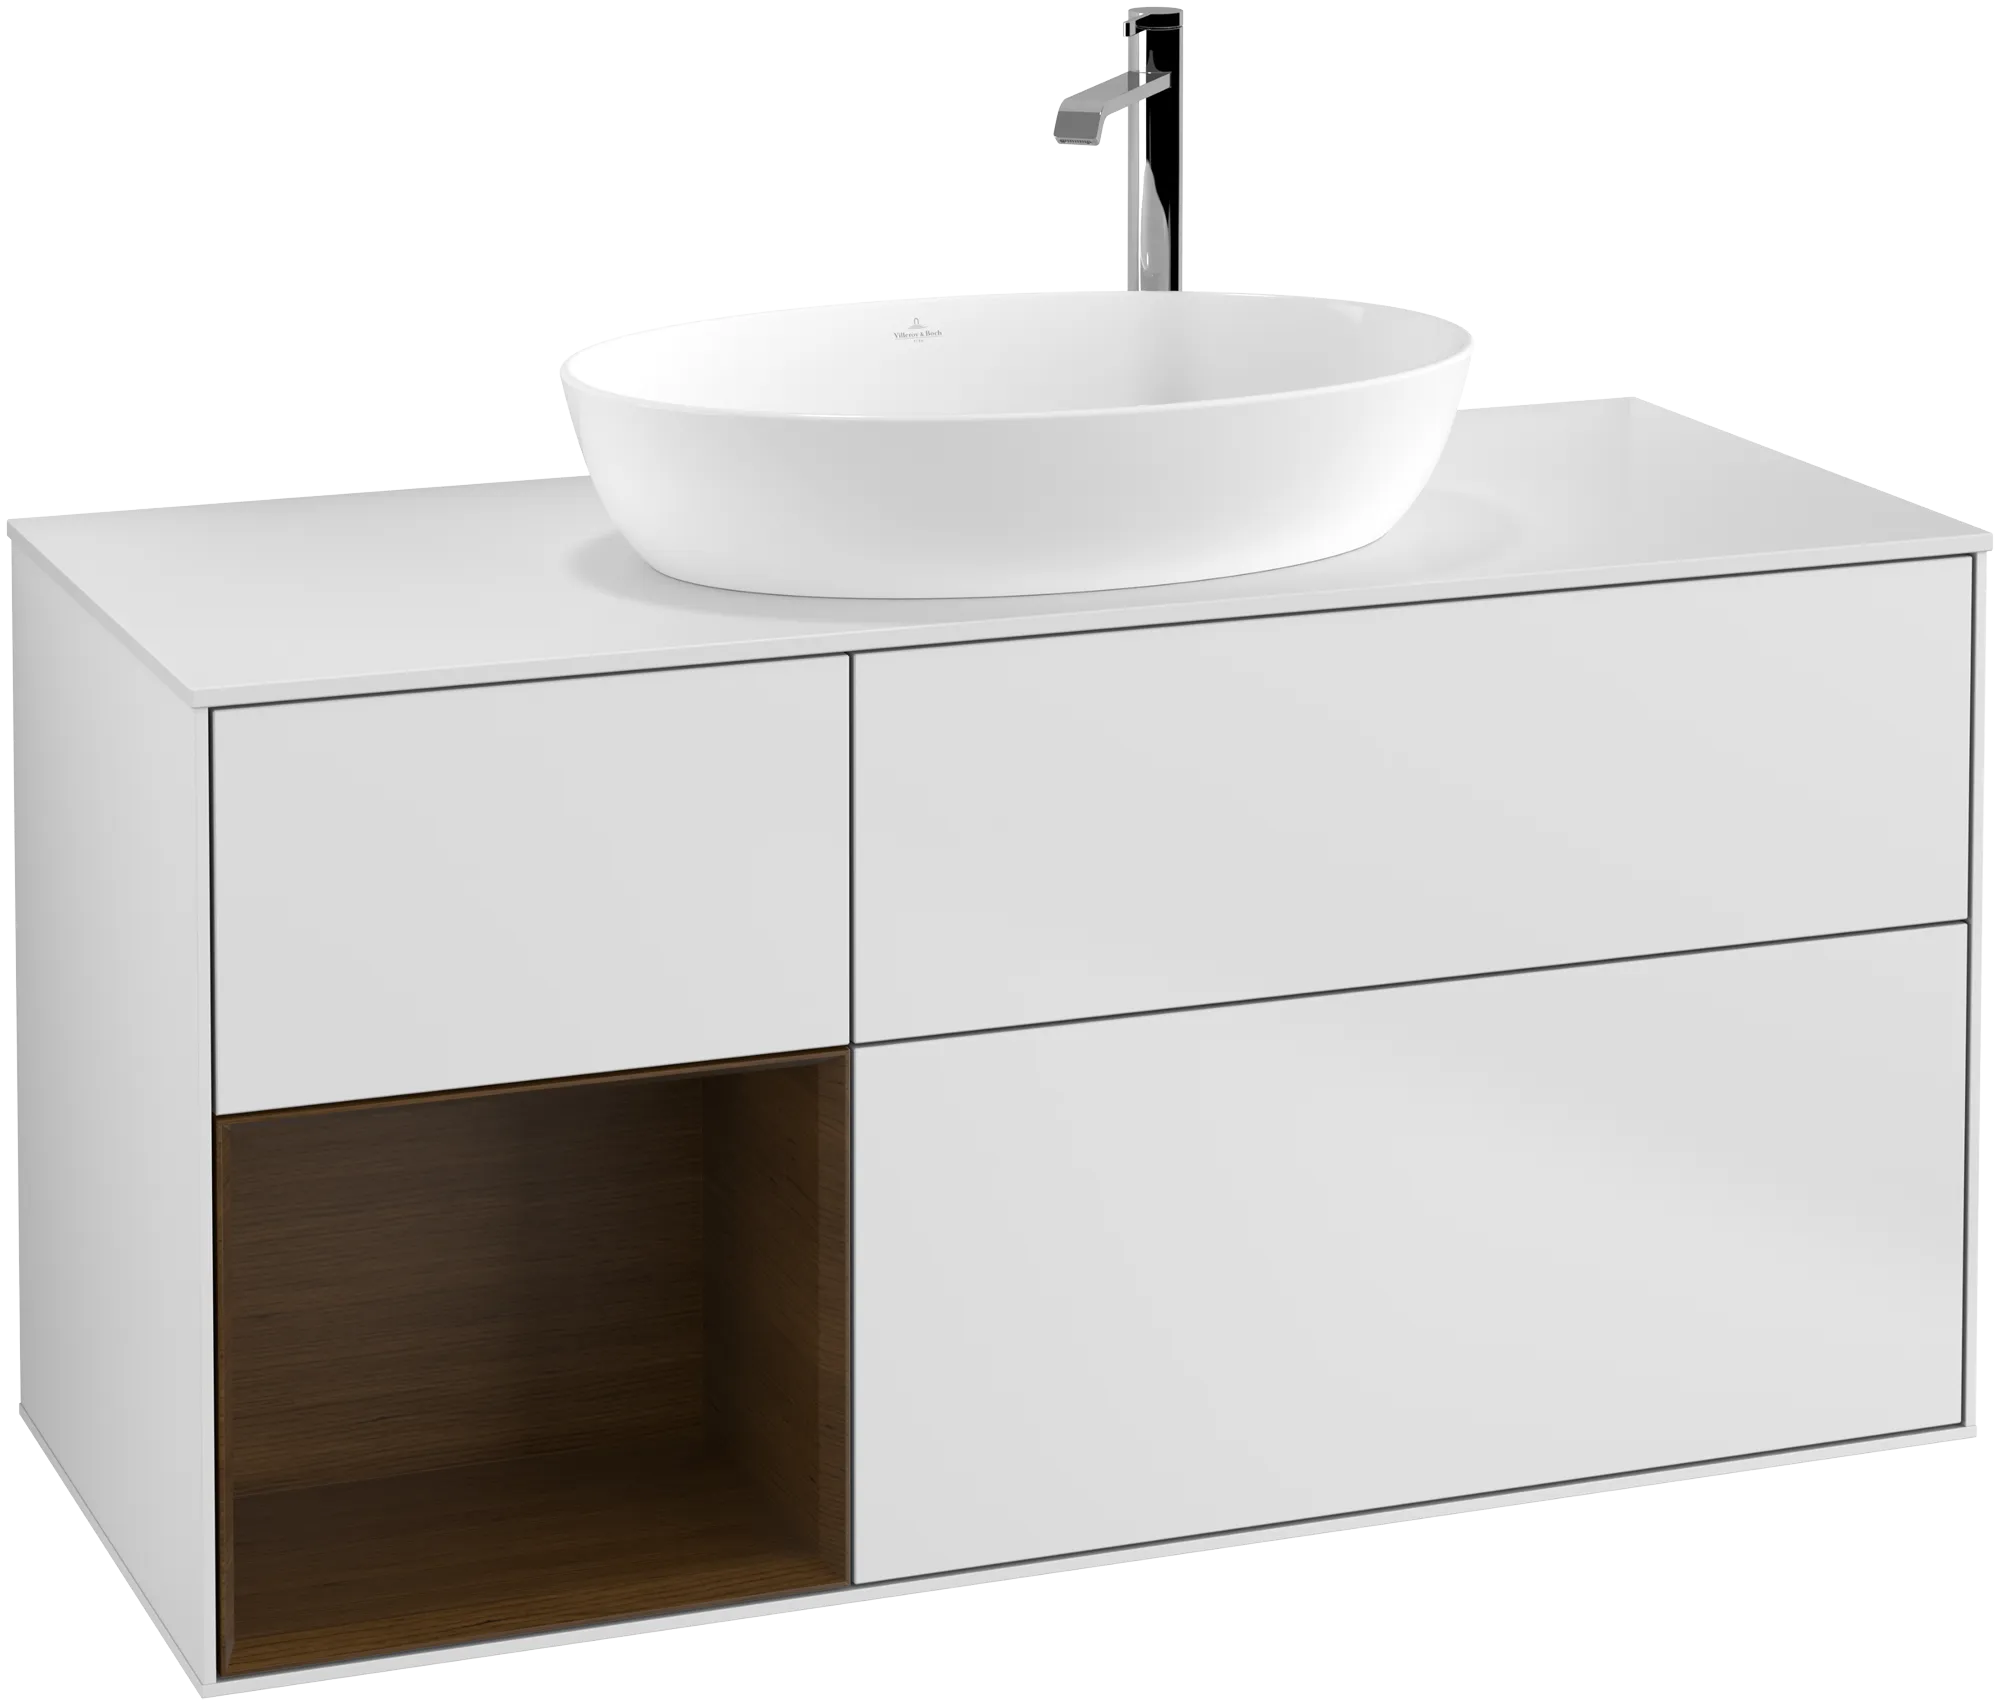 Picture of VILLEROY BOCH Finion Vanity unit, with lighting, 3 pull-out compartments, 1200 x 603 x 501 mm, White Matt Lacquer / Walnut Veneer / Glass White Matt #G941GNMT